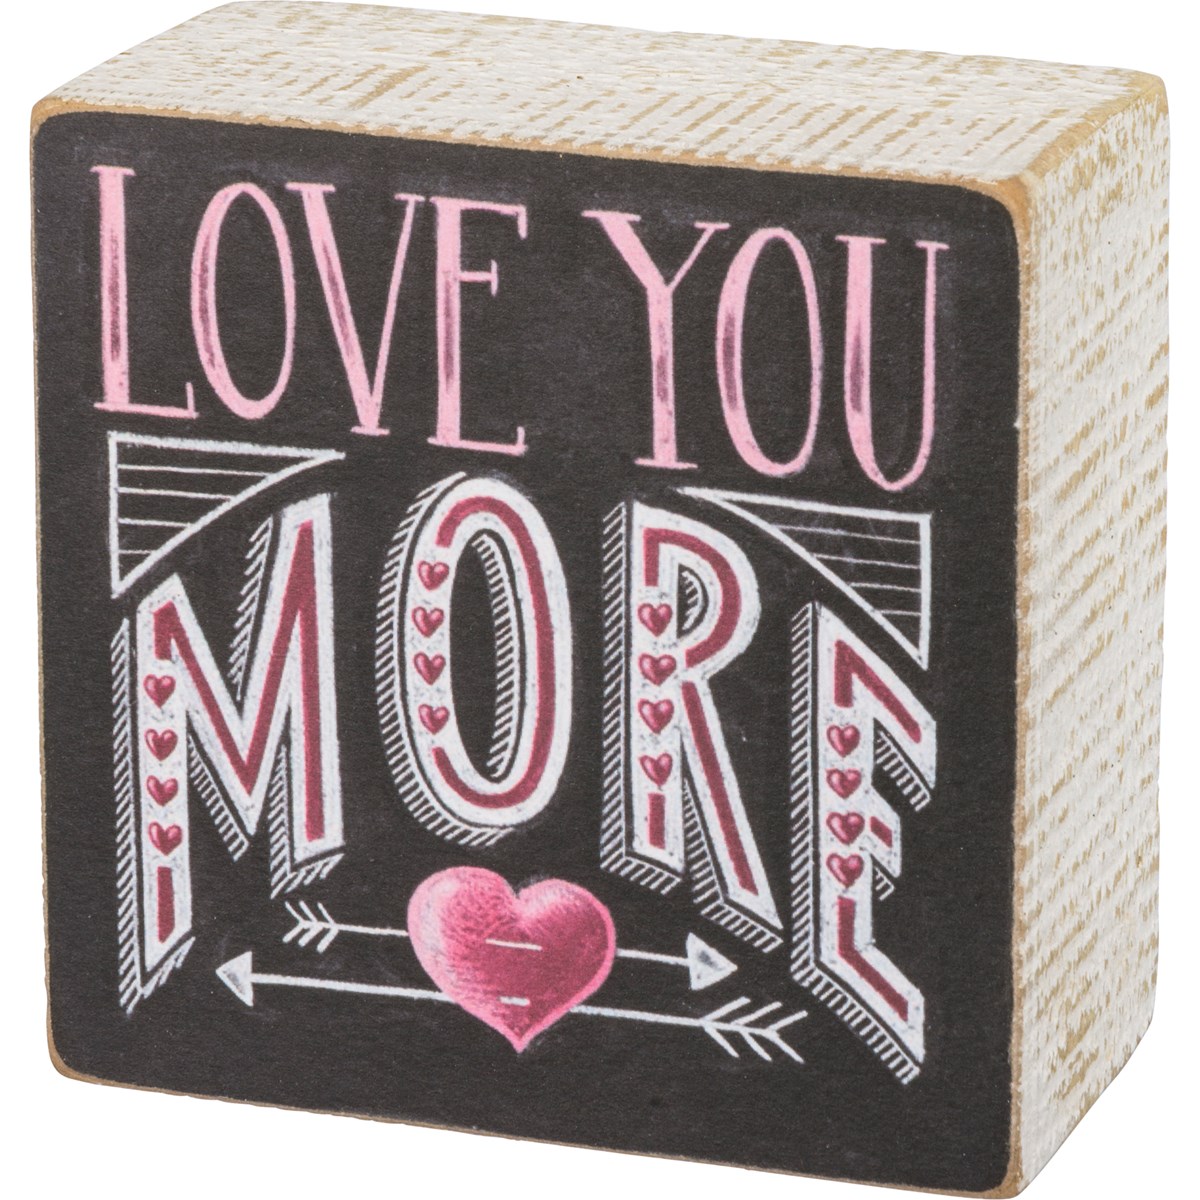 Chalk Sign - Love You More - 3.50" x 3.50" x 1.75" - Wood, Paper